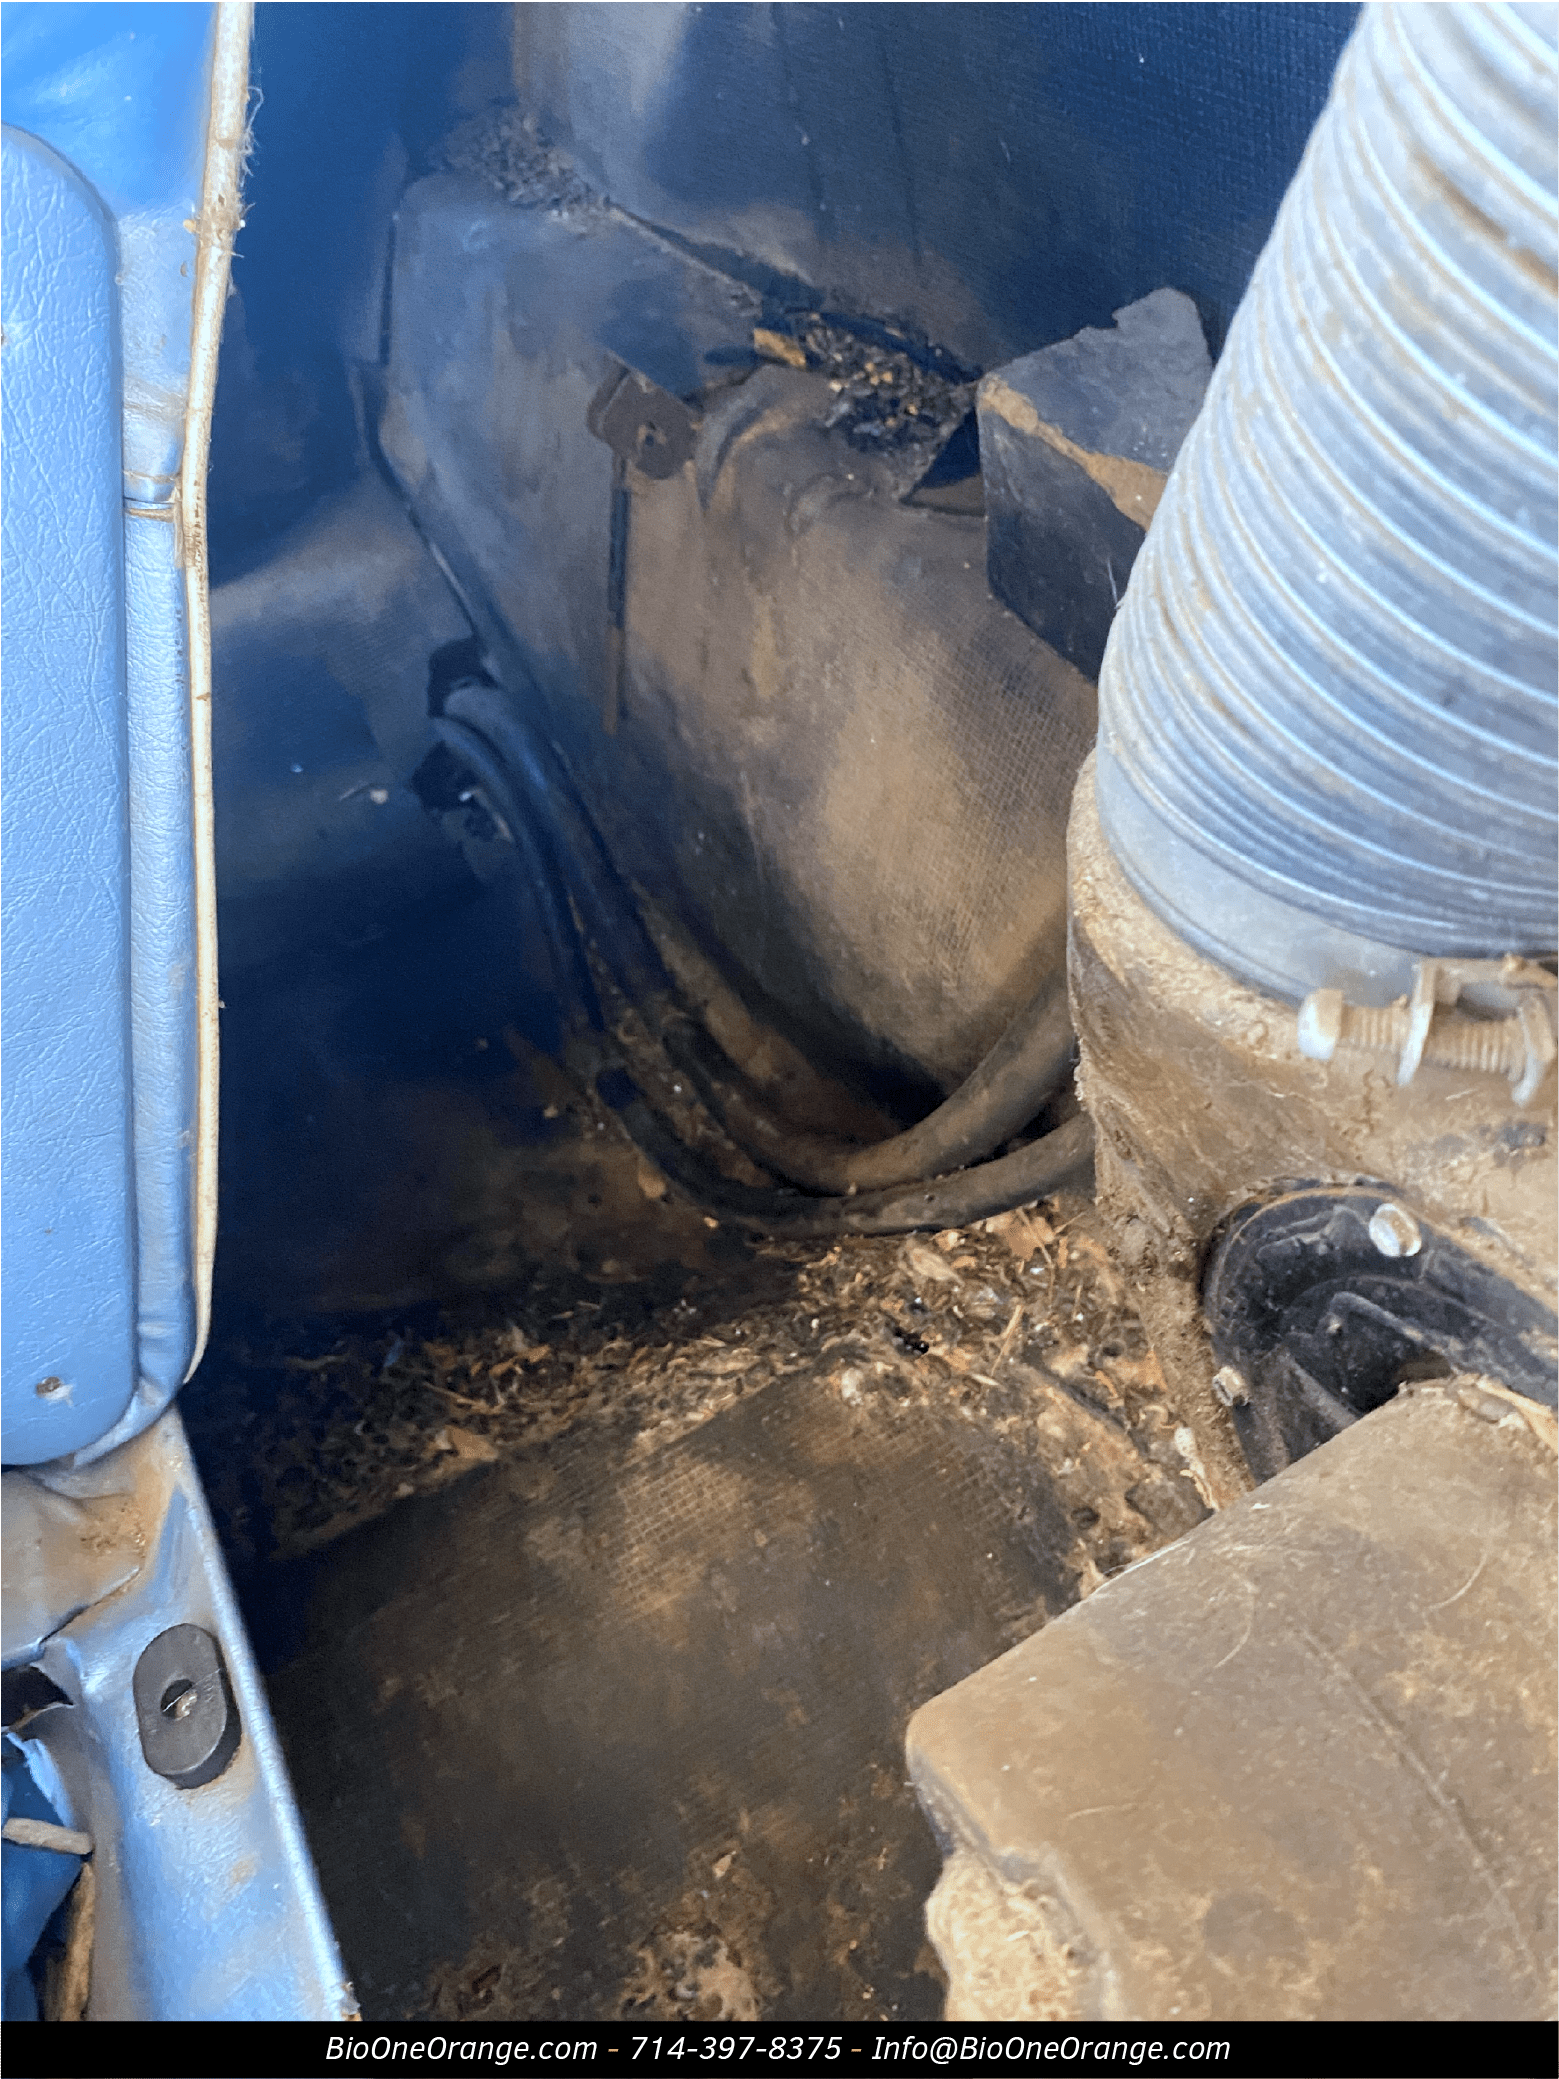 Image shows rodent droppings inside a vehicle.